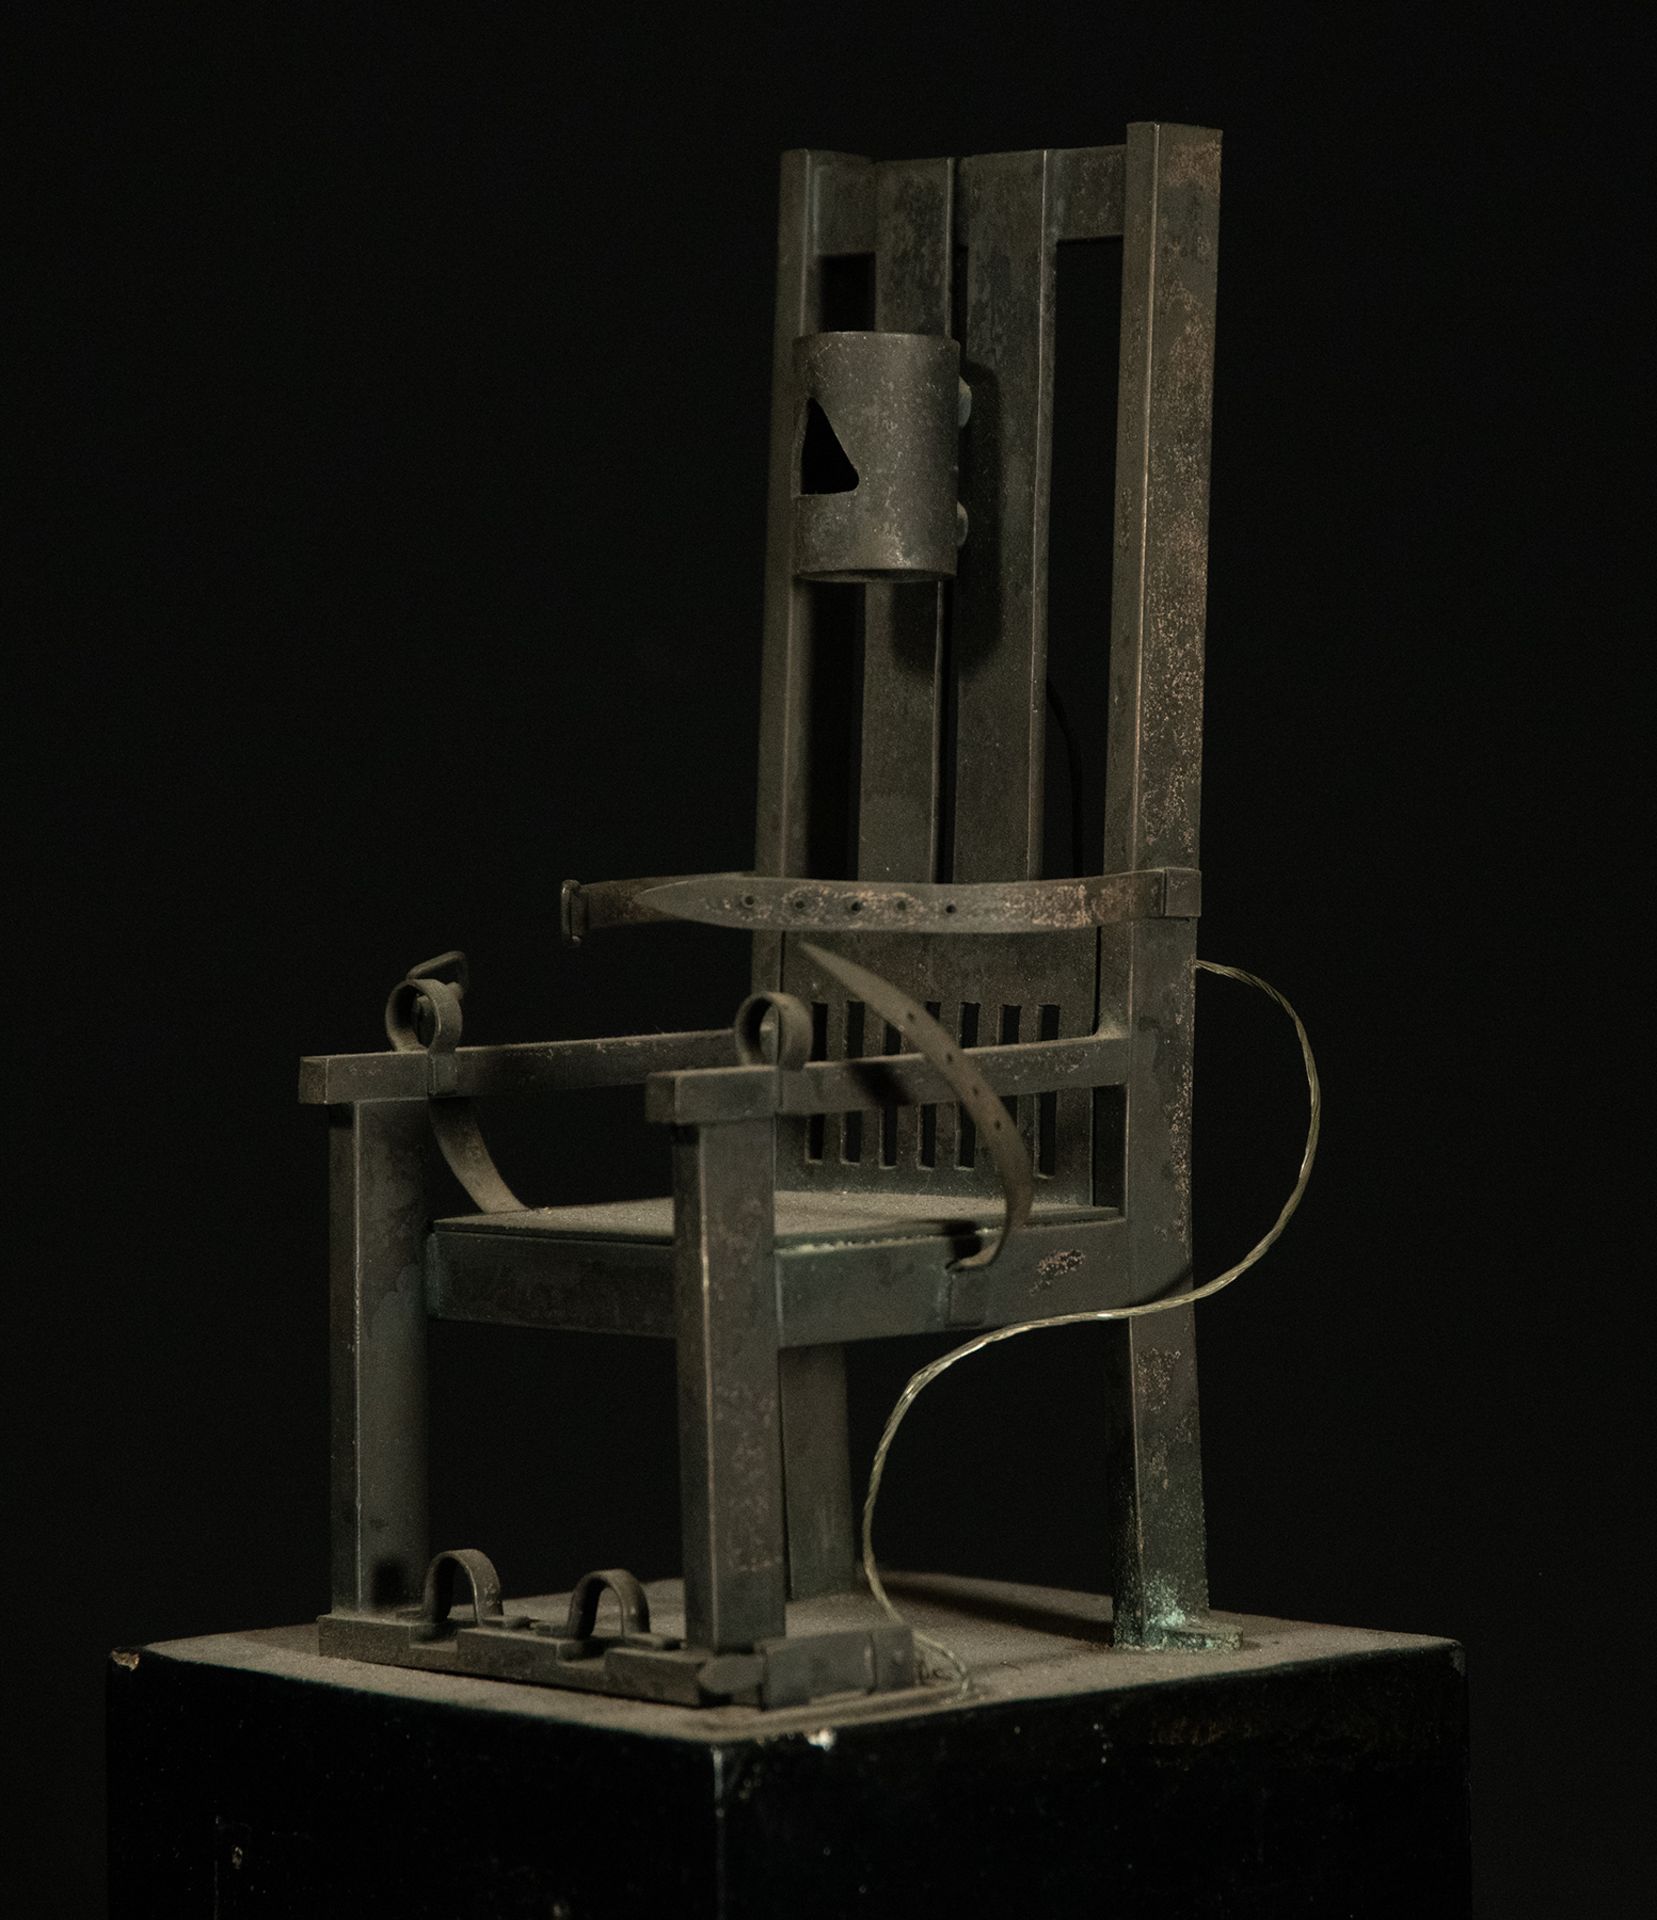 Rare Miniature Electrified Electric Chair, USA, 1950s - Image 3 of 4